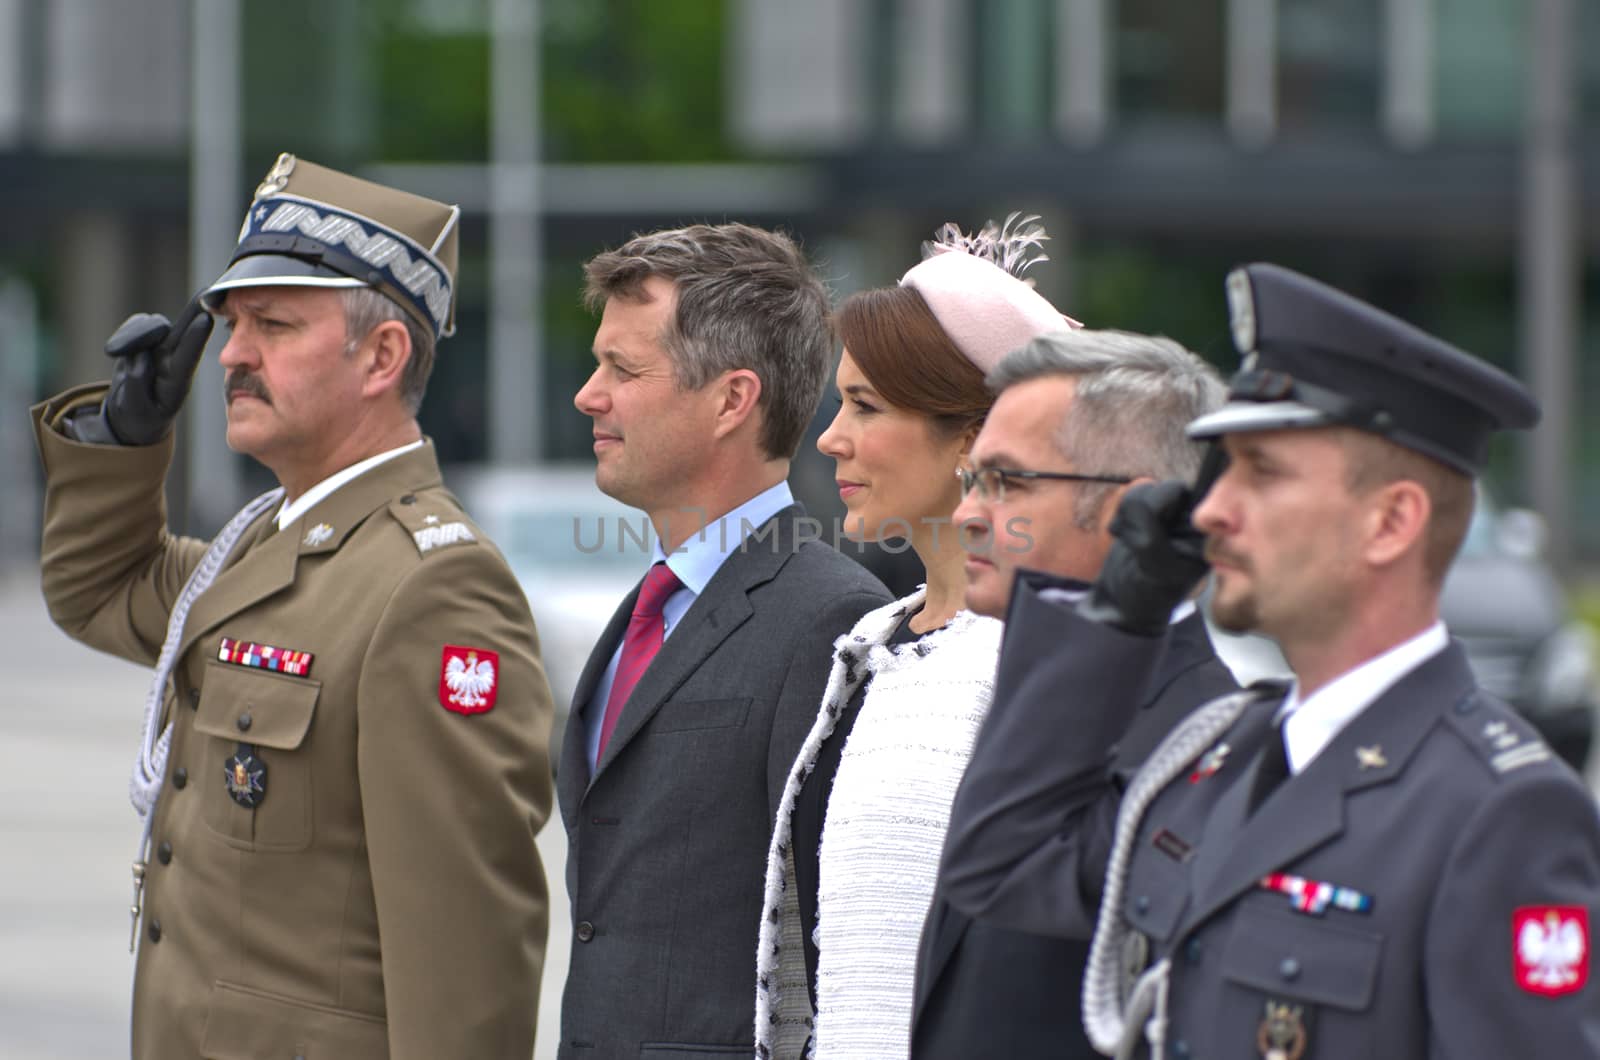 Warsaw, Poland - May 12, 2014: Danish Crown Prince Couple on state visit to Poland. Crown Prince of Denmark Frederik and Crown Princess Mary during the wreath laying ceremony.